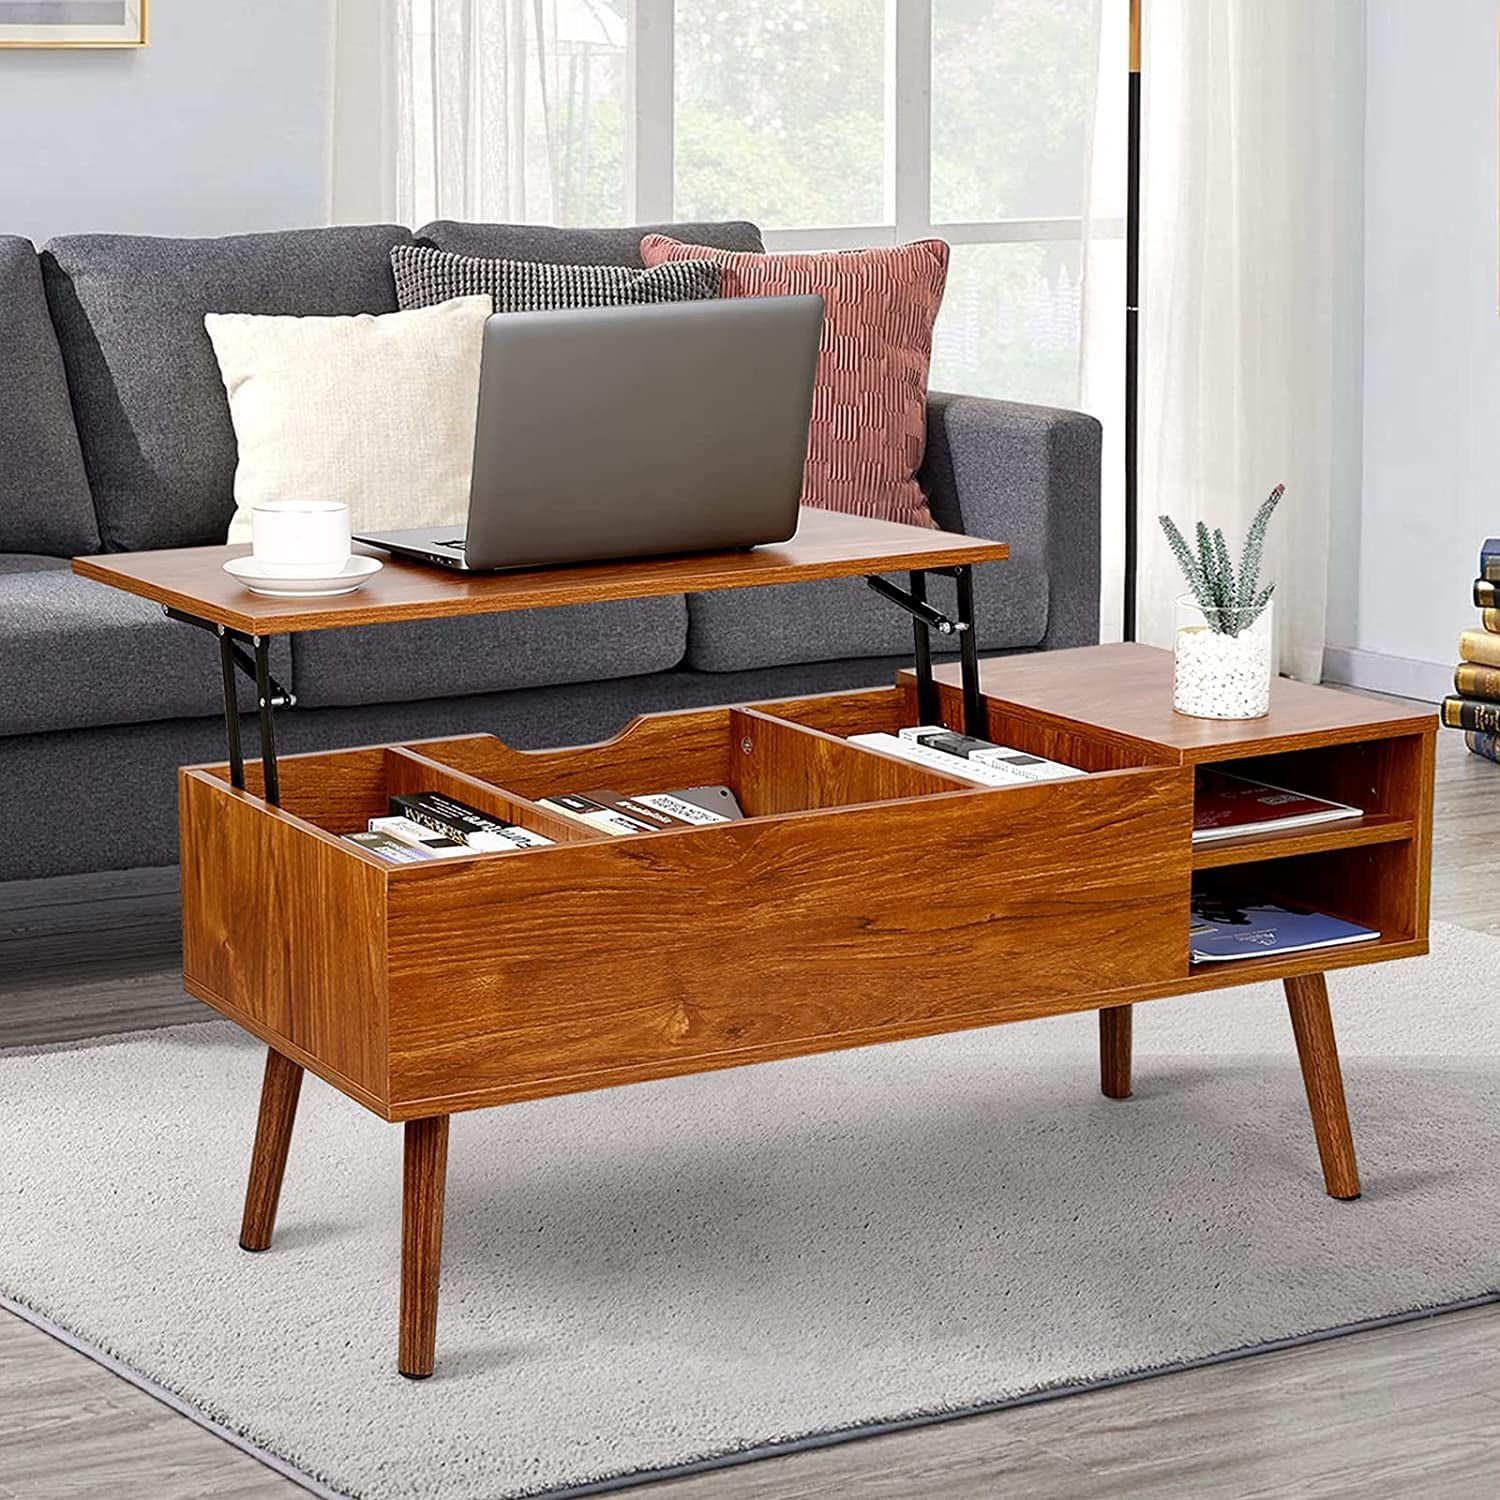 Modern Lift Top Coffee Table With Hidden Compartment Storage,adjustable With Coffee Tables With Hidden Compartments (View 4 of 20)